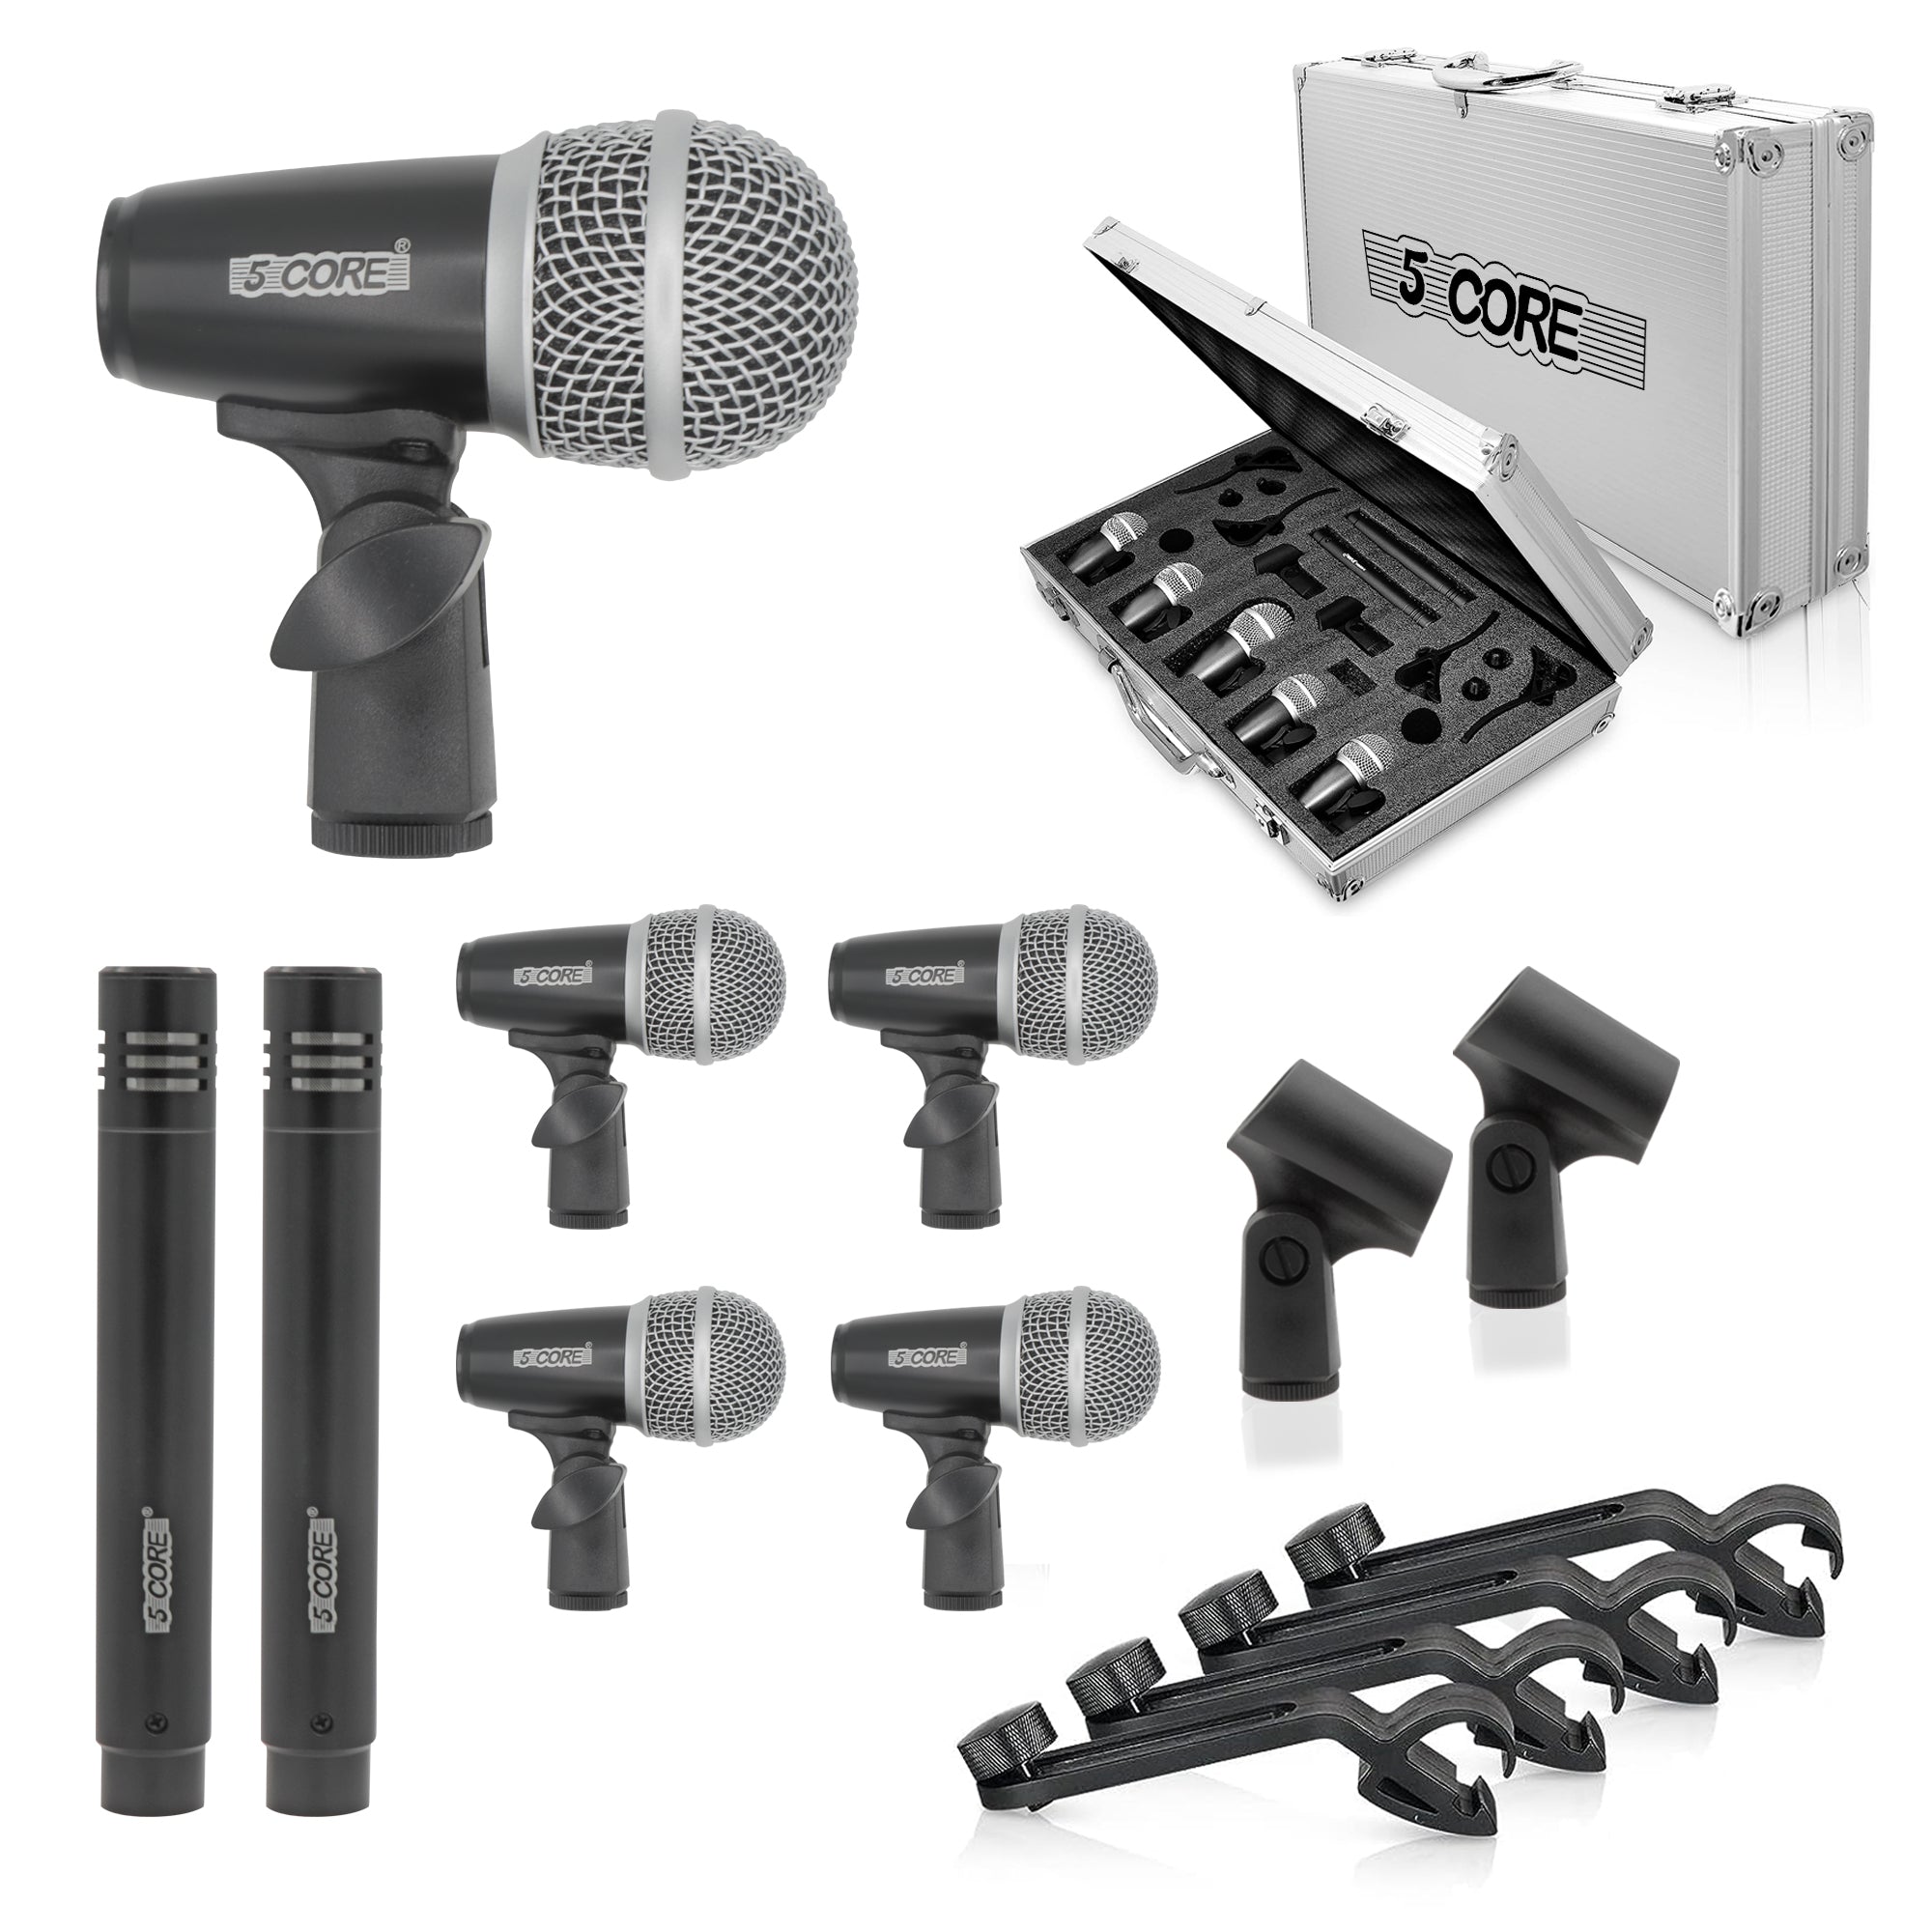 5 Core 7 Piece Drum Microphone Kit • Wired Dynamic XLR Mics Kick Bass Tom Snare and Cymbals Set